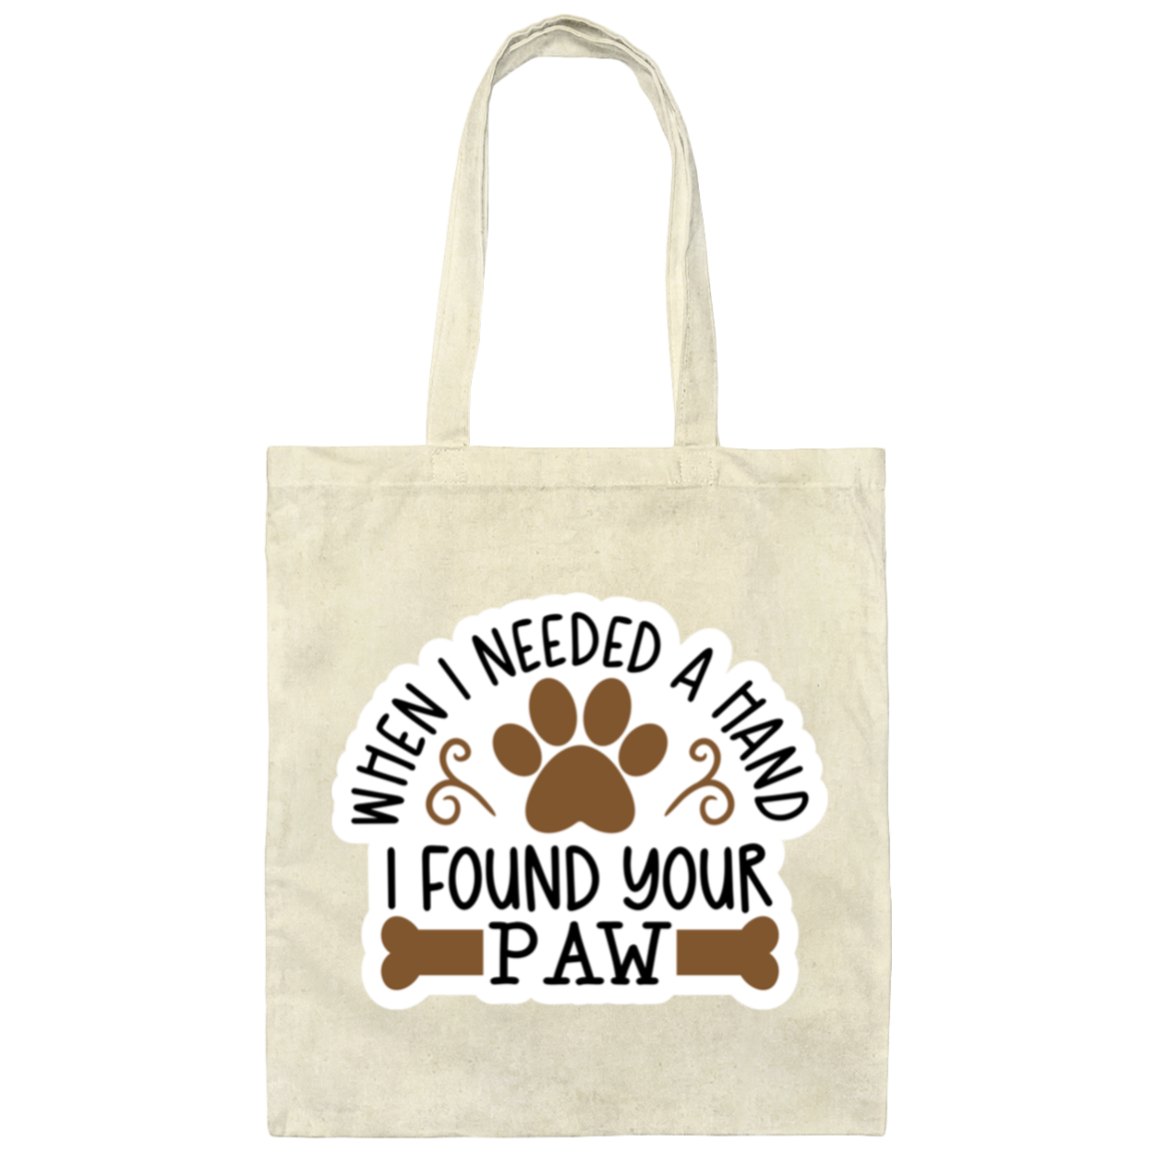 When I Needed a Hand I Found Your Paw Dog Rescue Canvas Tote Bag